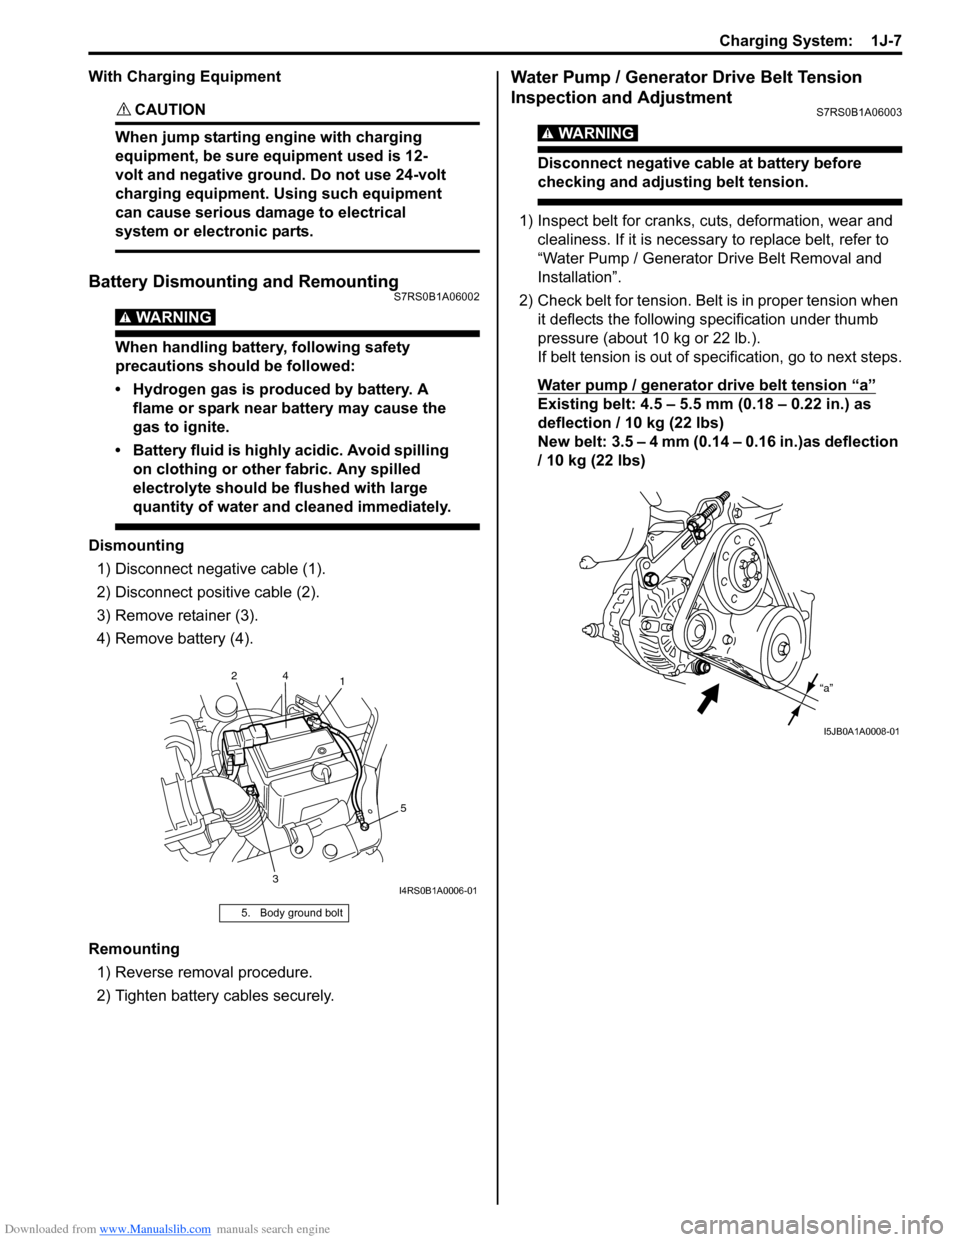 SUZUKI SWIFT 2008 2.G Service Service Manual Downloaded from www.Manualslib.com manuals search engine Charging System:  1J-7
With Charging Equipment
CAUTION! 
When jump starting engine with charging 
equipment, be sure equipment used is 12-
volt